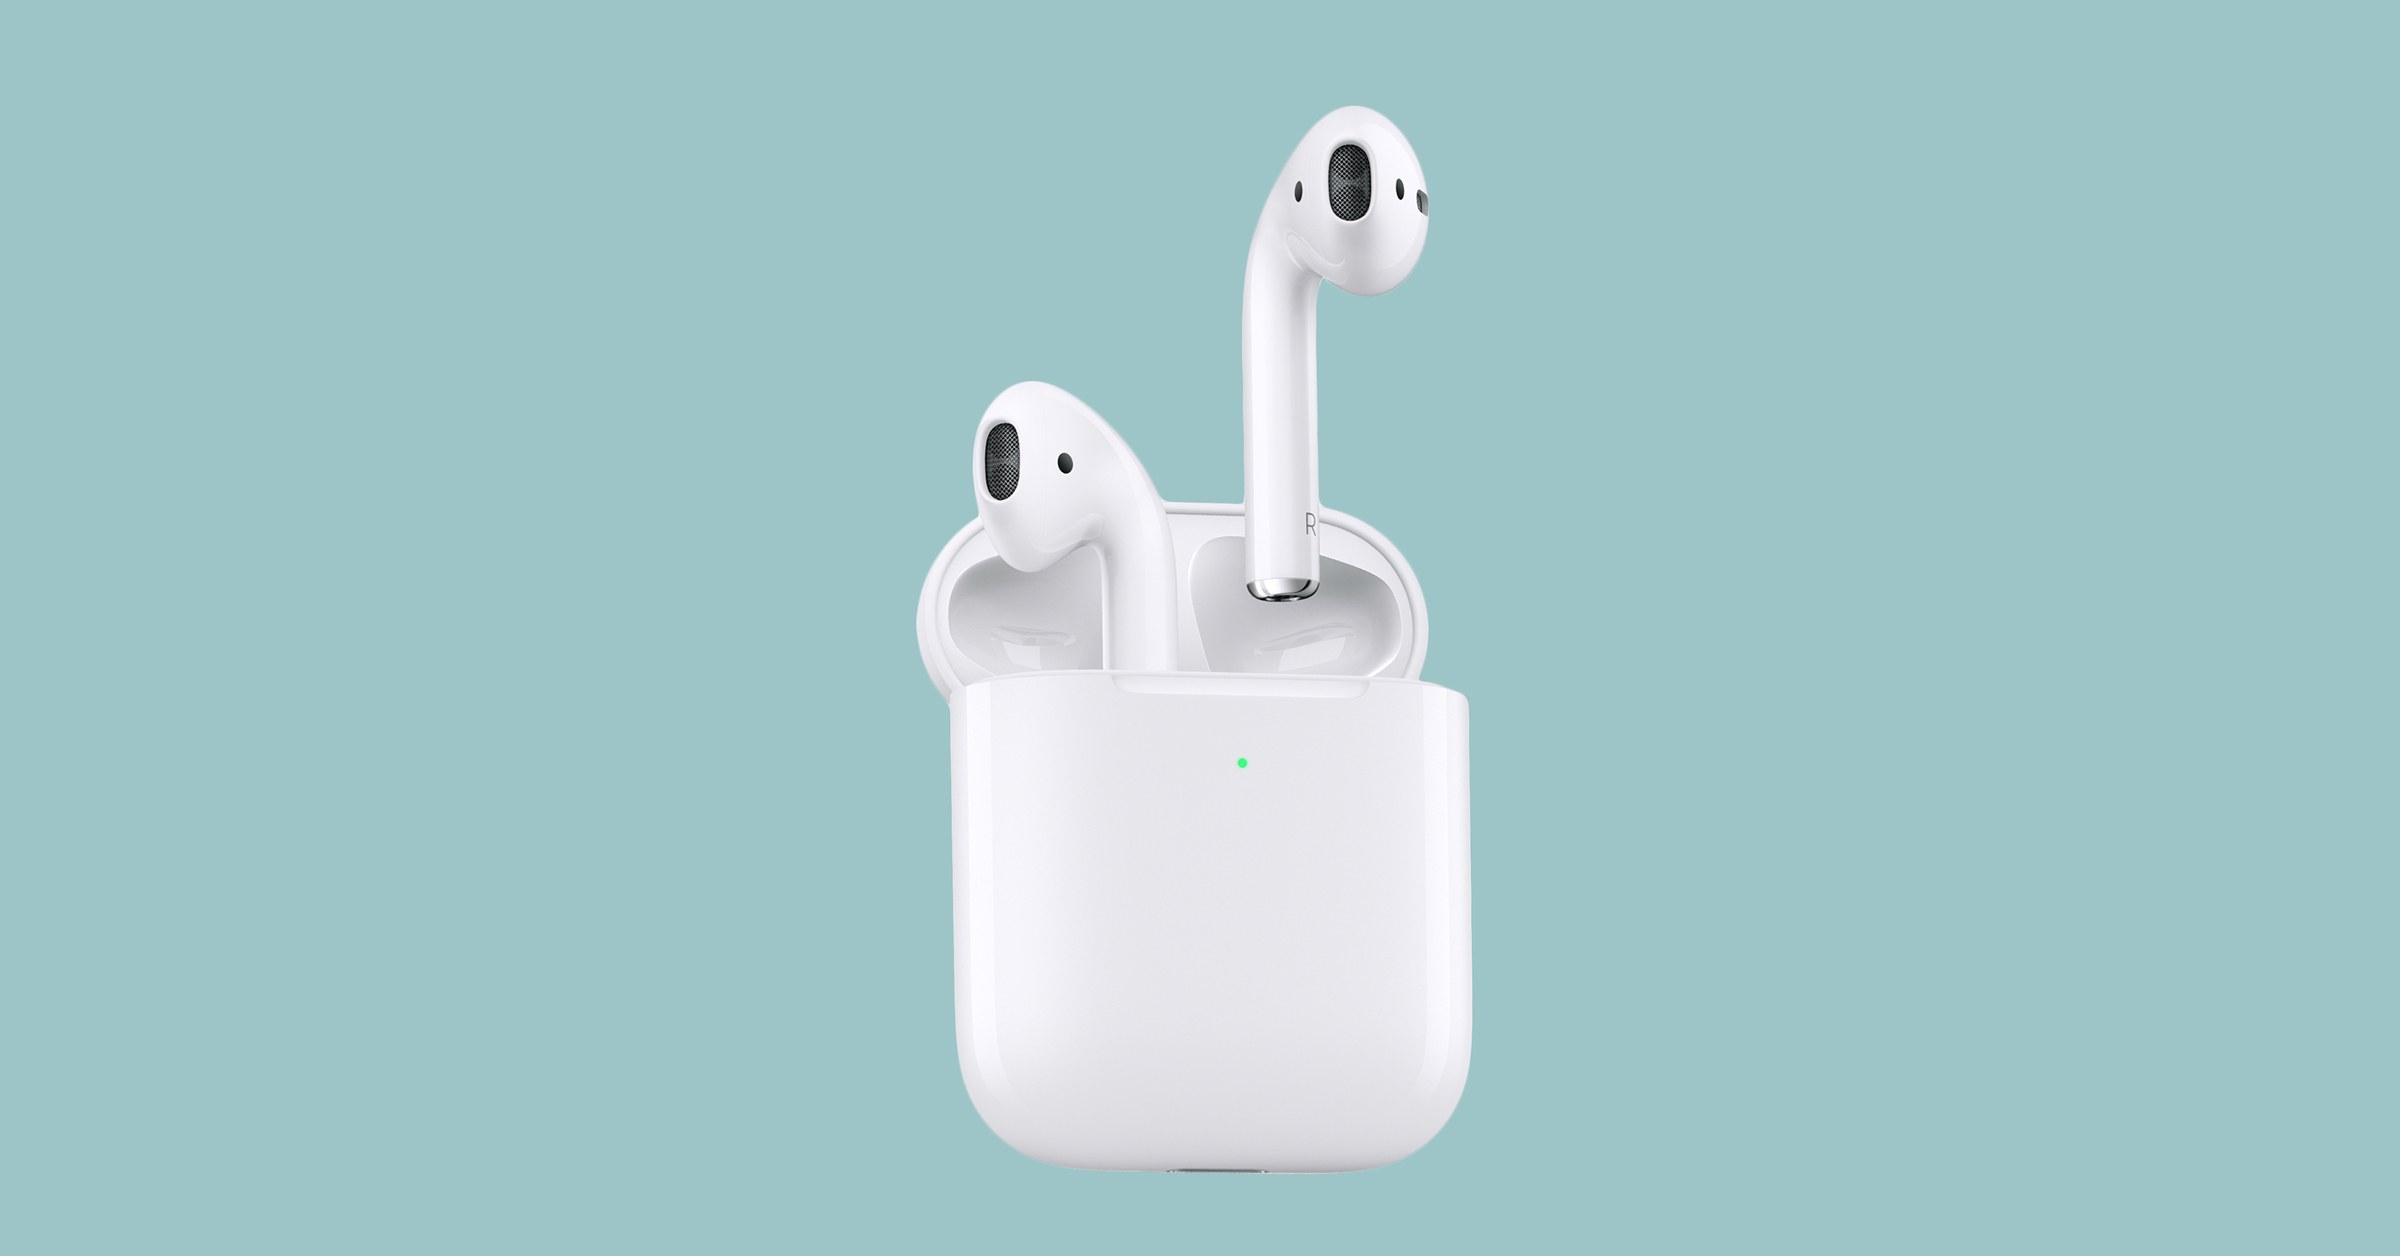 Apple working on a newer AirPods model and HomePod; Likely to be official in 2020